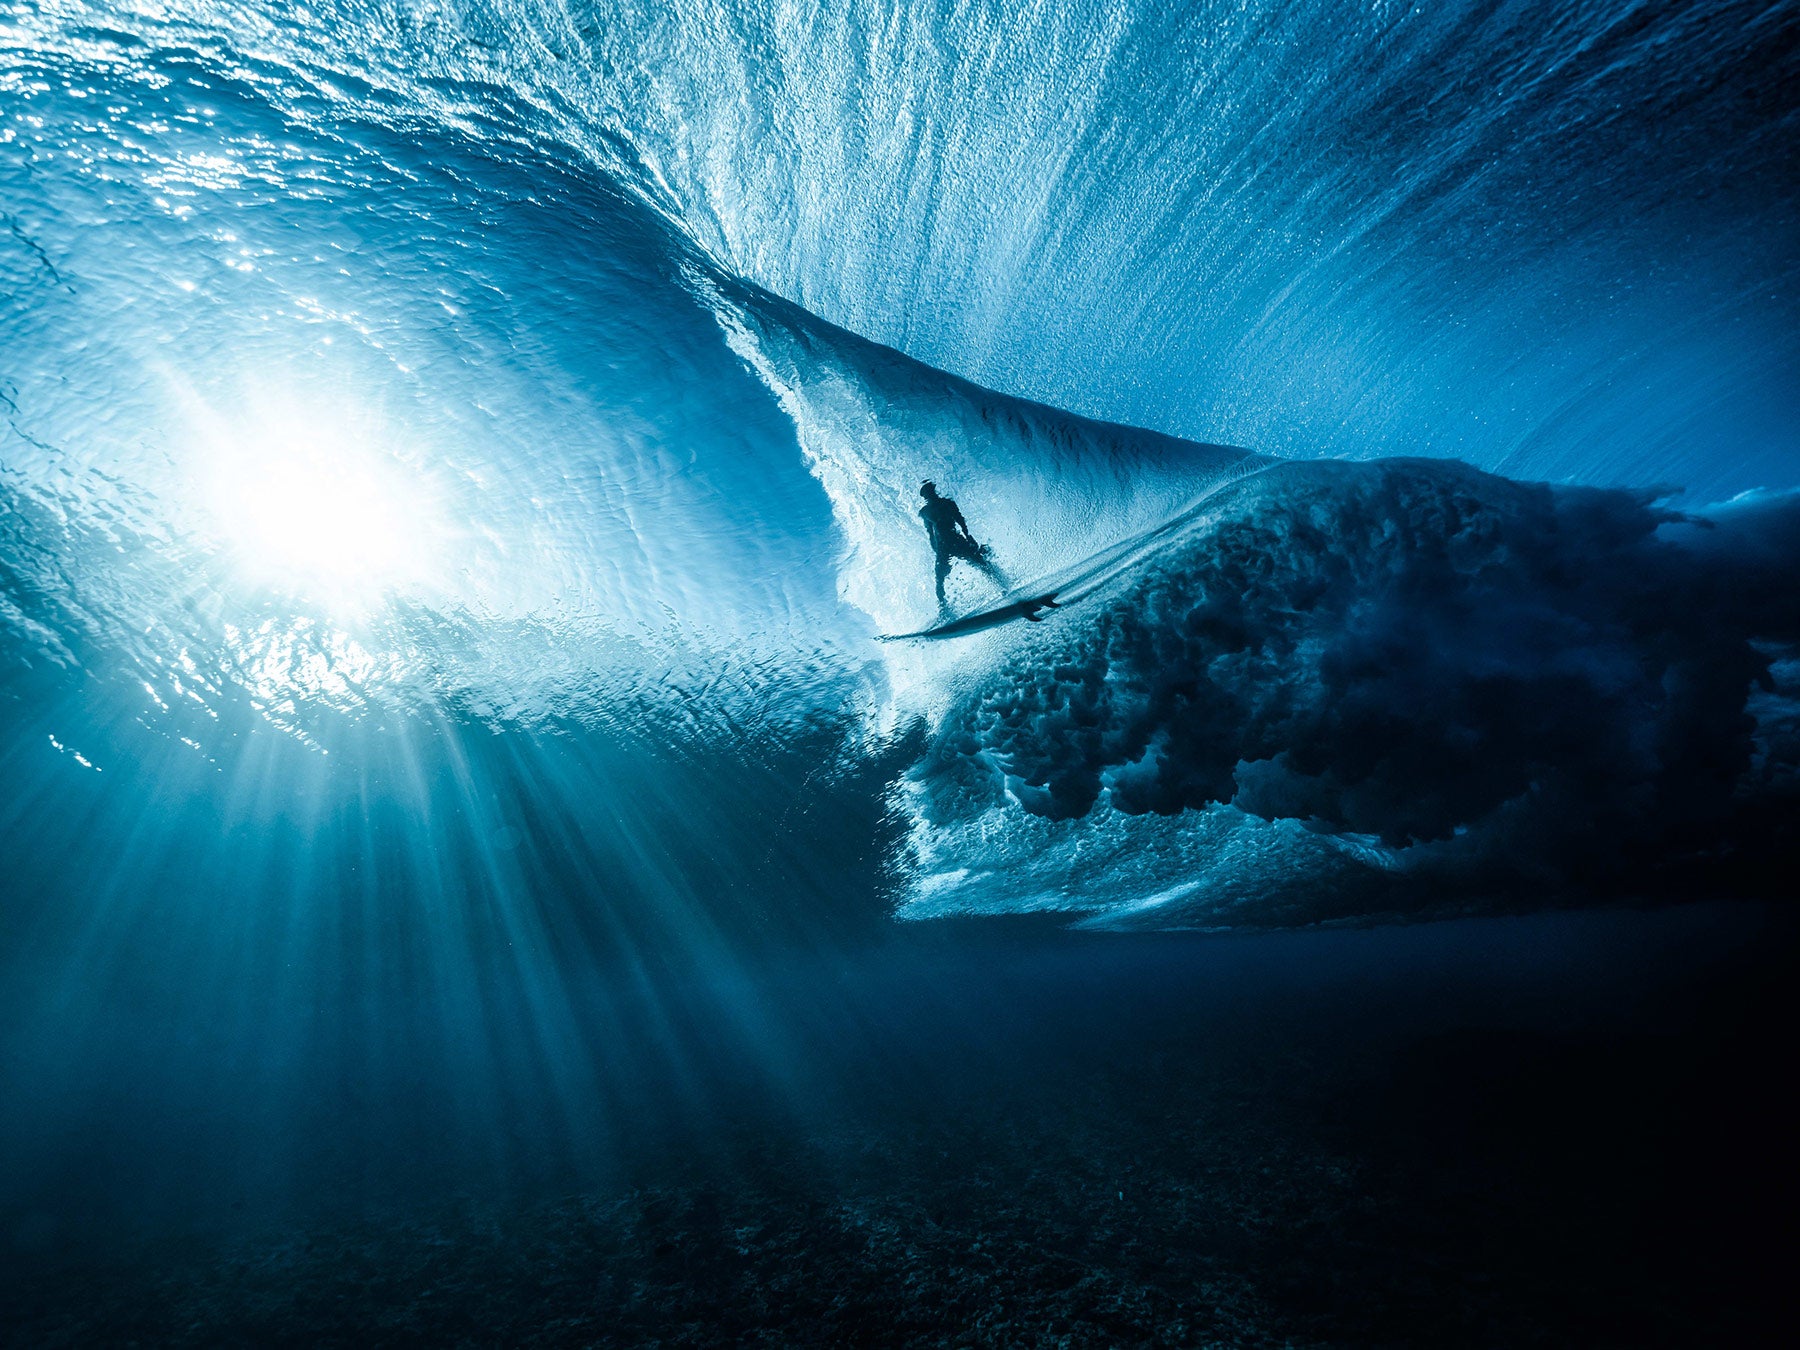 A surfer is seen from beneath the wave while rays of sunlight cut through the darkness.